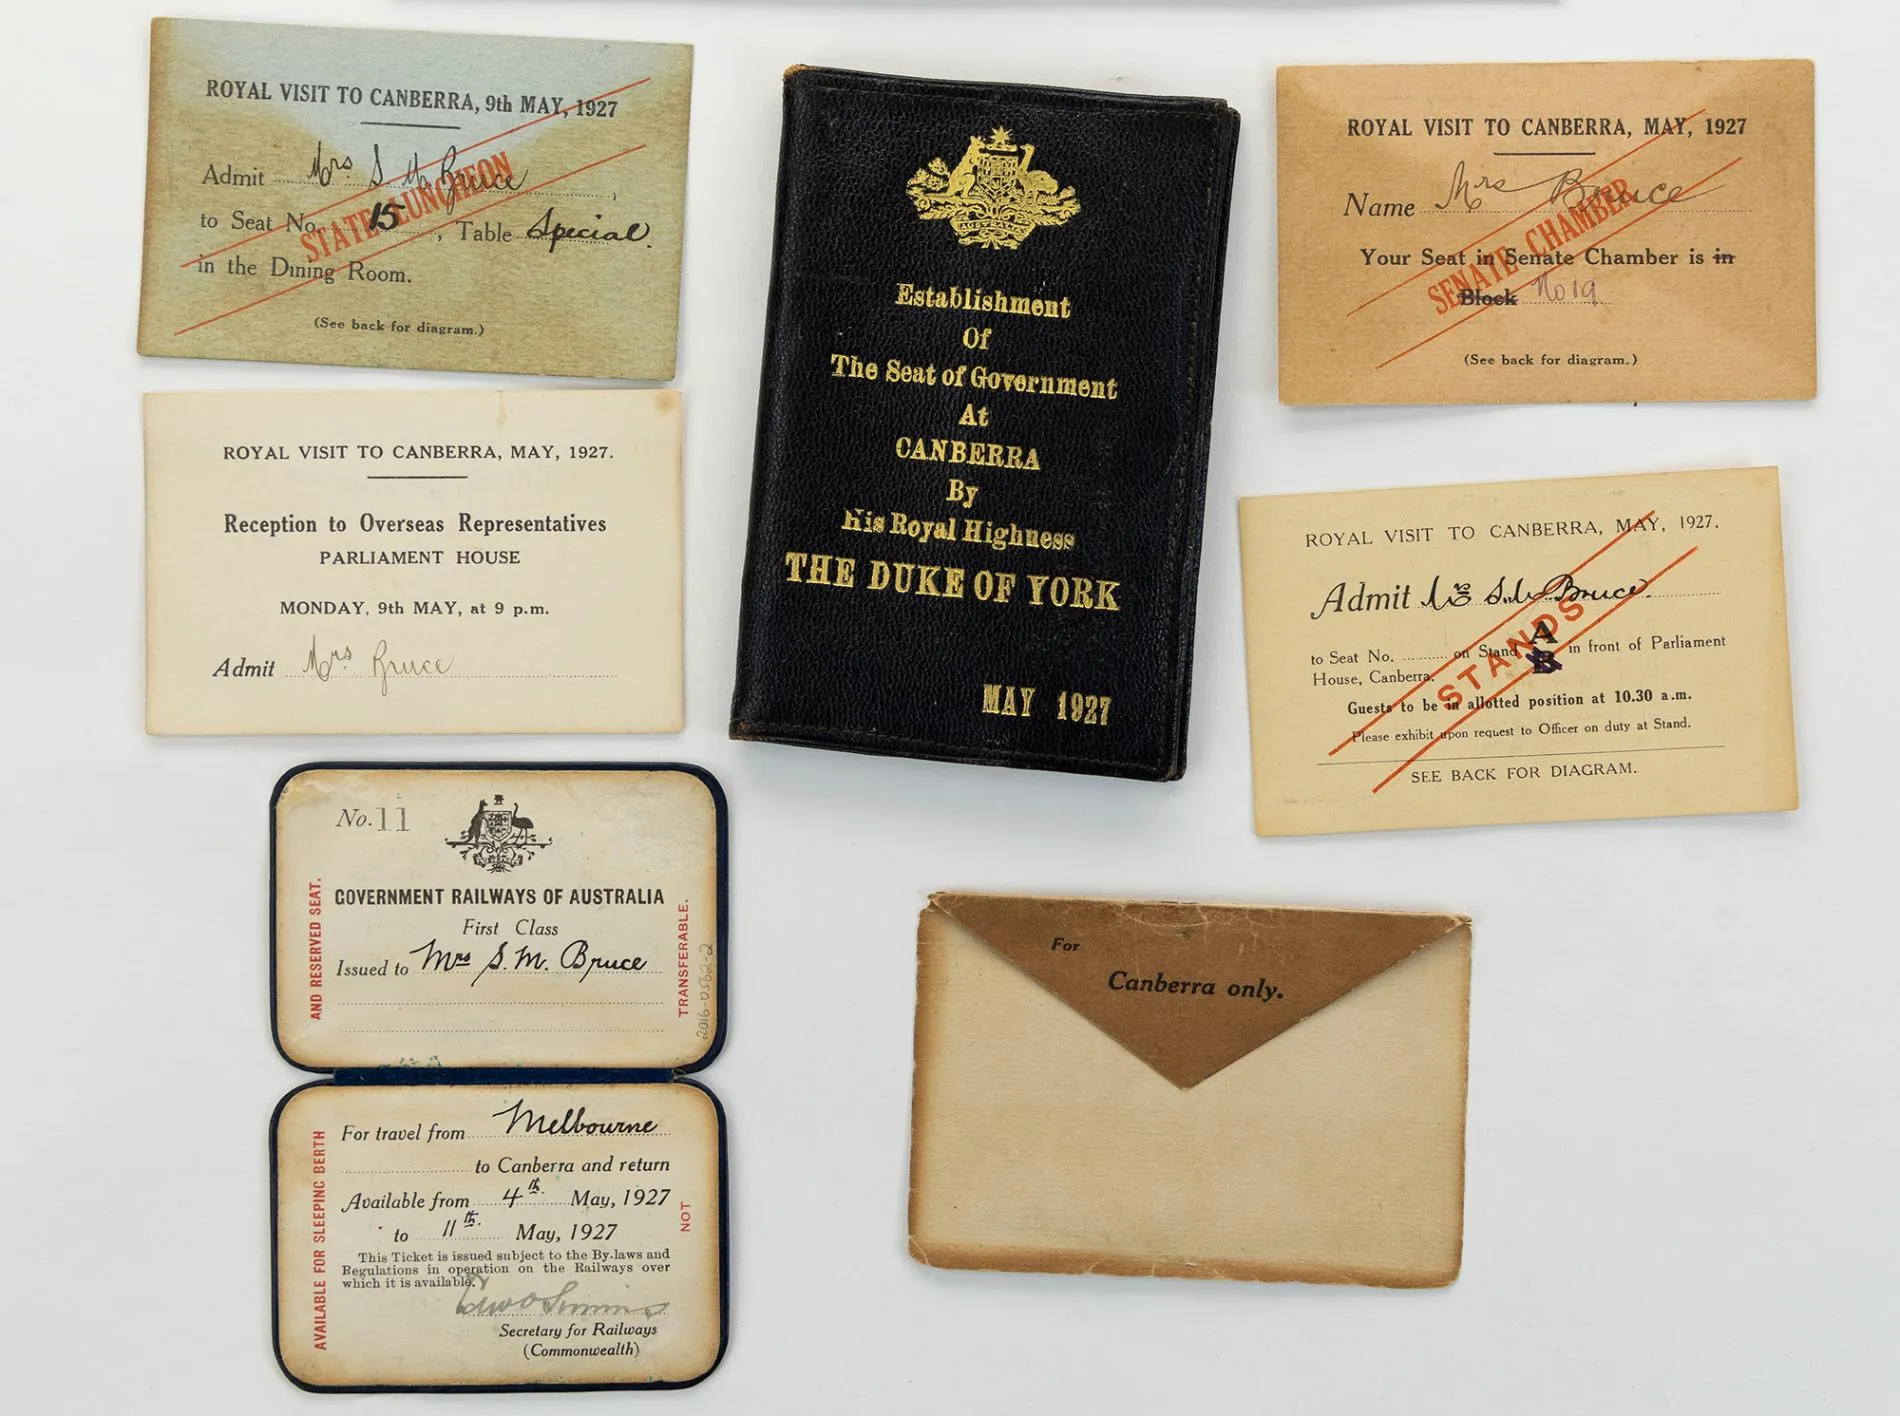 A black leather wallet with the Australian Coat of Arms and 'Establishment of the seat of Government at Canberra by His Royal Highness The Duke of York May 1927' embossed in gold, an envelope, first class railway ticket from Melbourne to Canberra for Mrs Bruce for travel from 4th May to 11th May 1927, rectangular tickets to the State Luncheon, Senate Chamber, Stands and Reception at Parliament House.